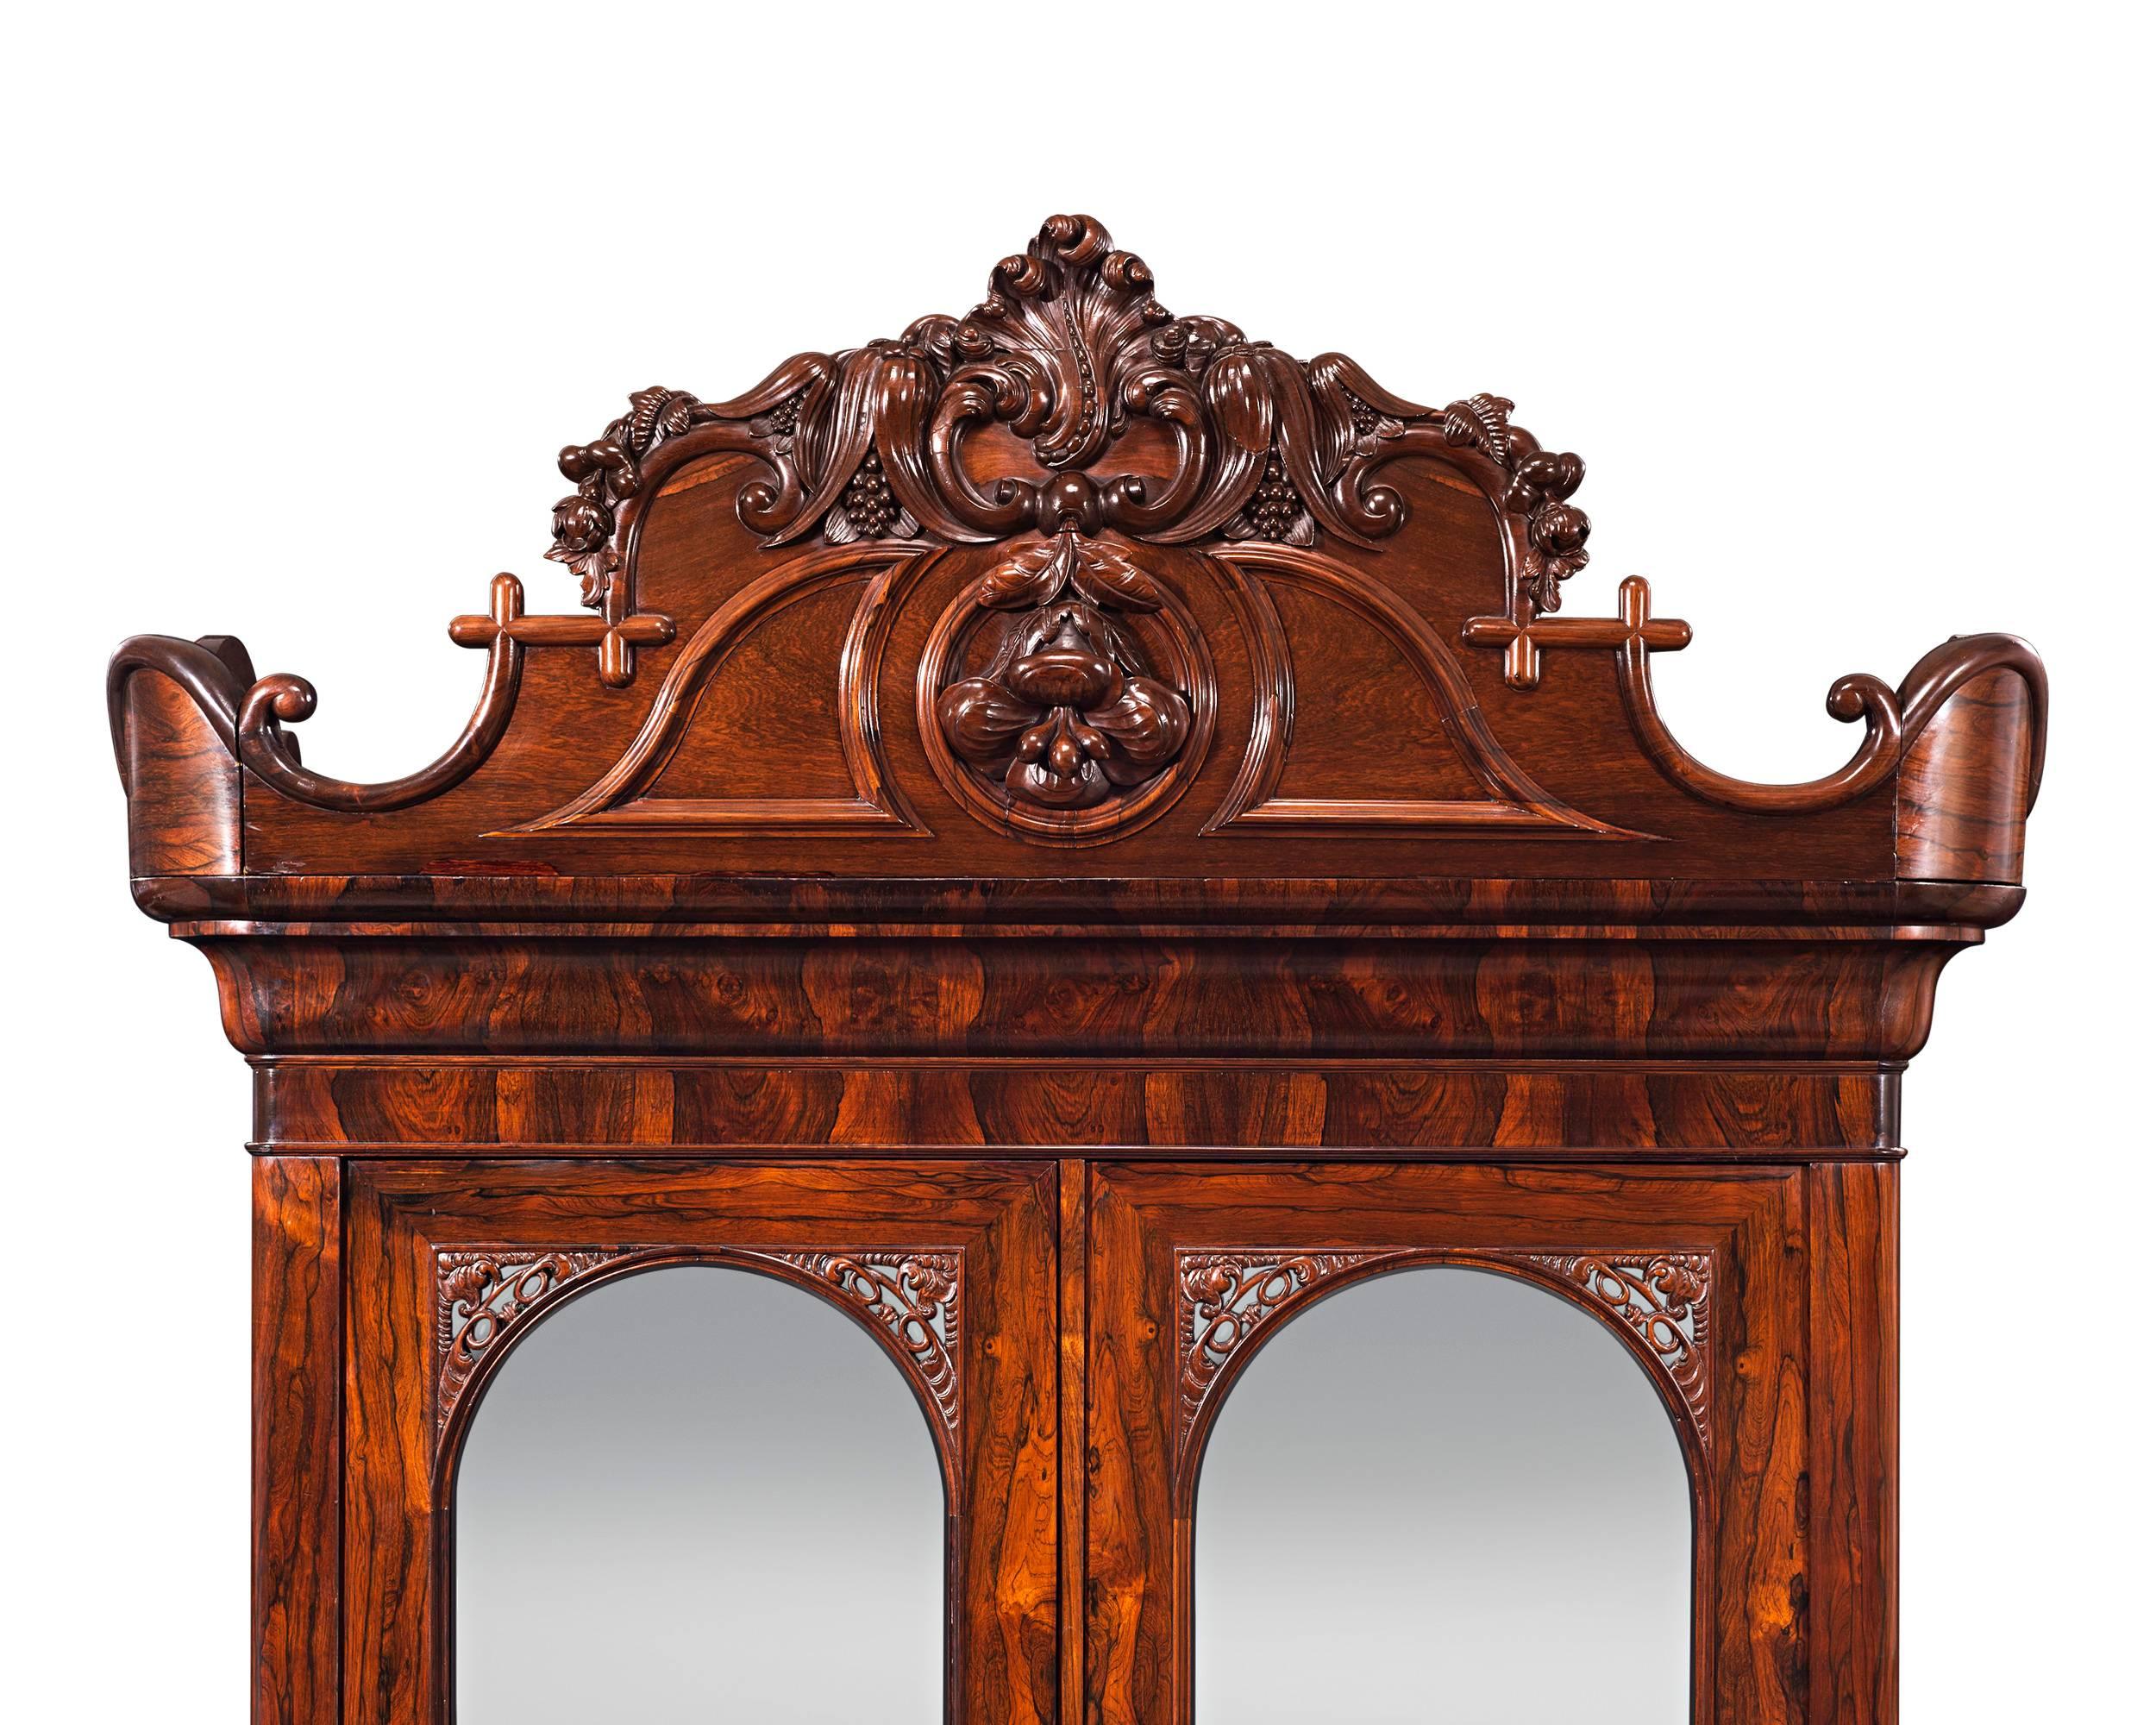 One of the rarest furniture forms created by John Henry Belter, this armoire is a testament to this legendary cabinet maker's talent. Recognized as a Pioneer in design and craftsmanship, Belter is widely considered the finest furniture maker of the